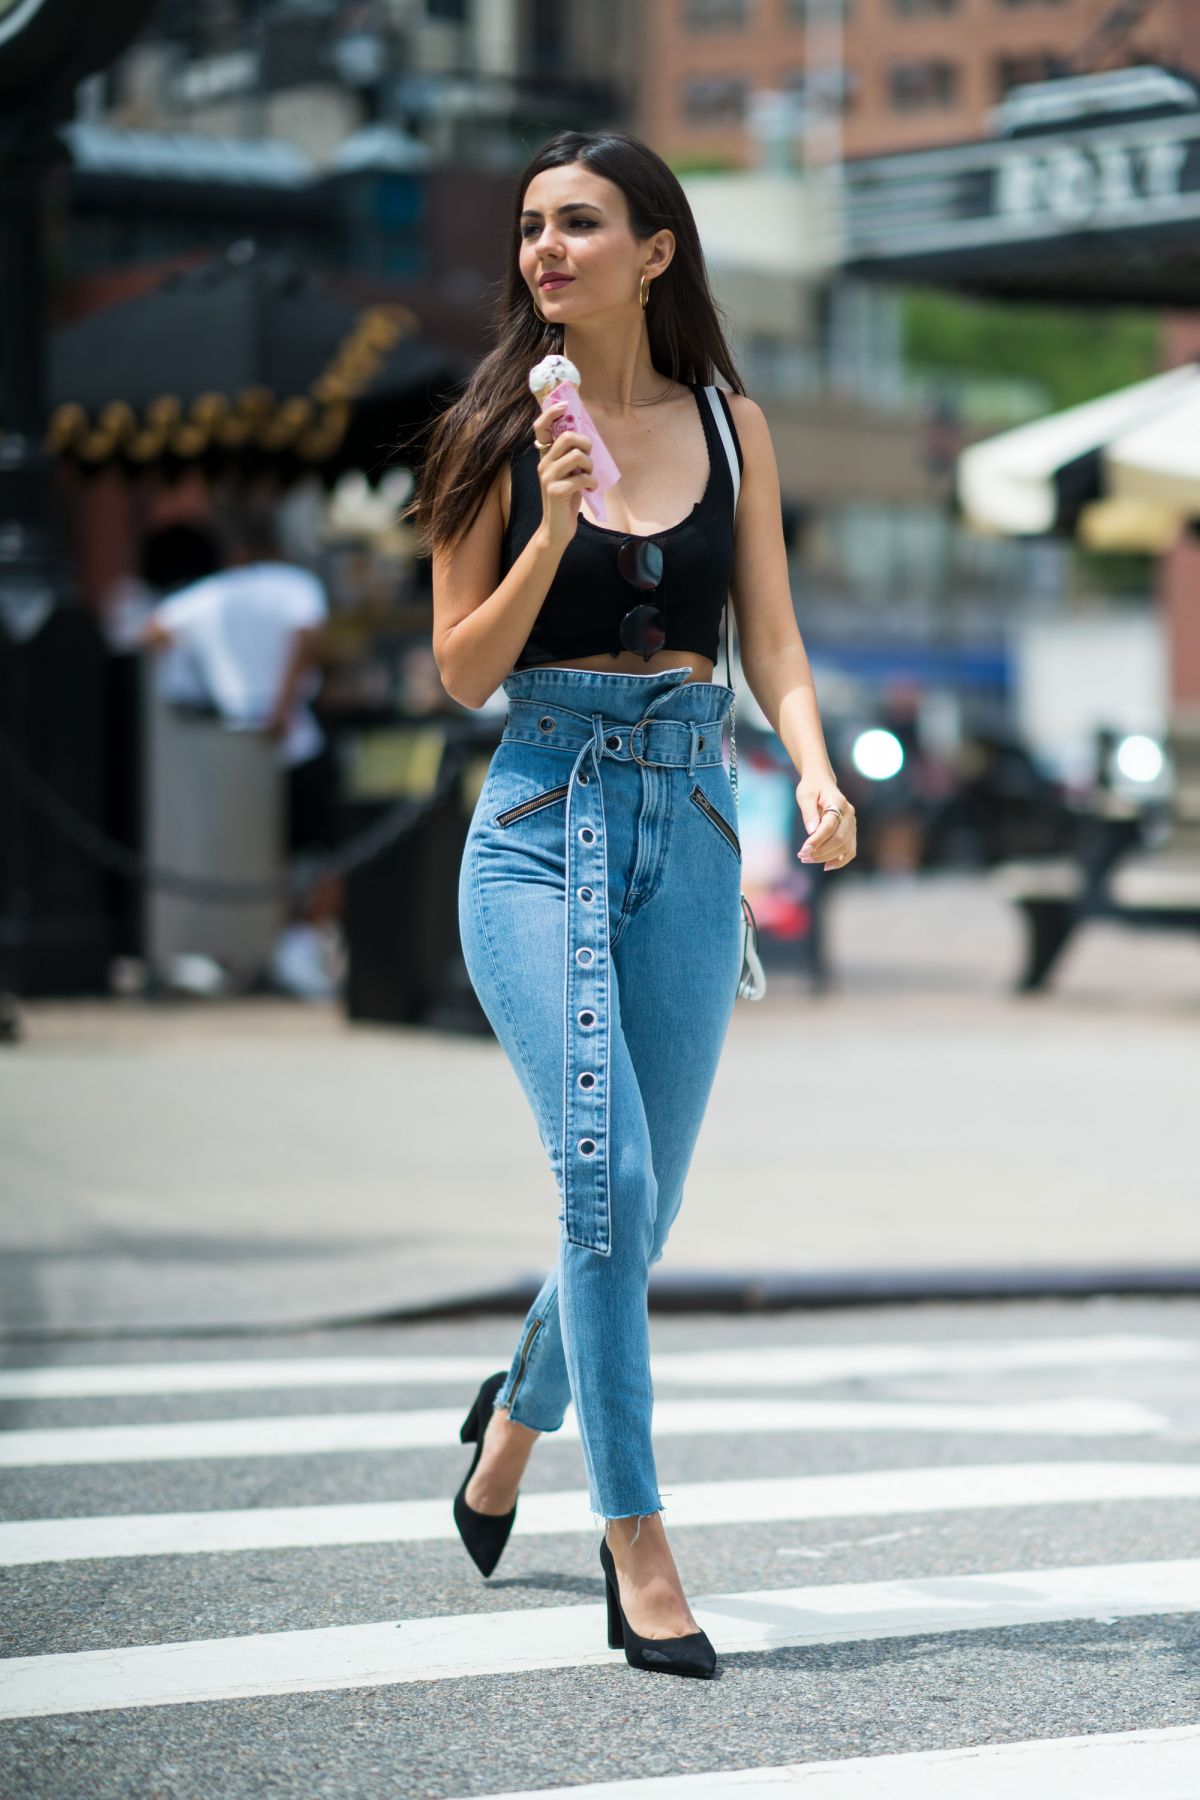 VICTORIA JUSTICE Out Eats Ice Cream in New York 06/22/2018 – HawtCelebs